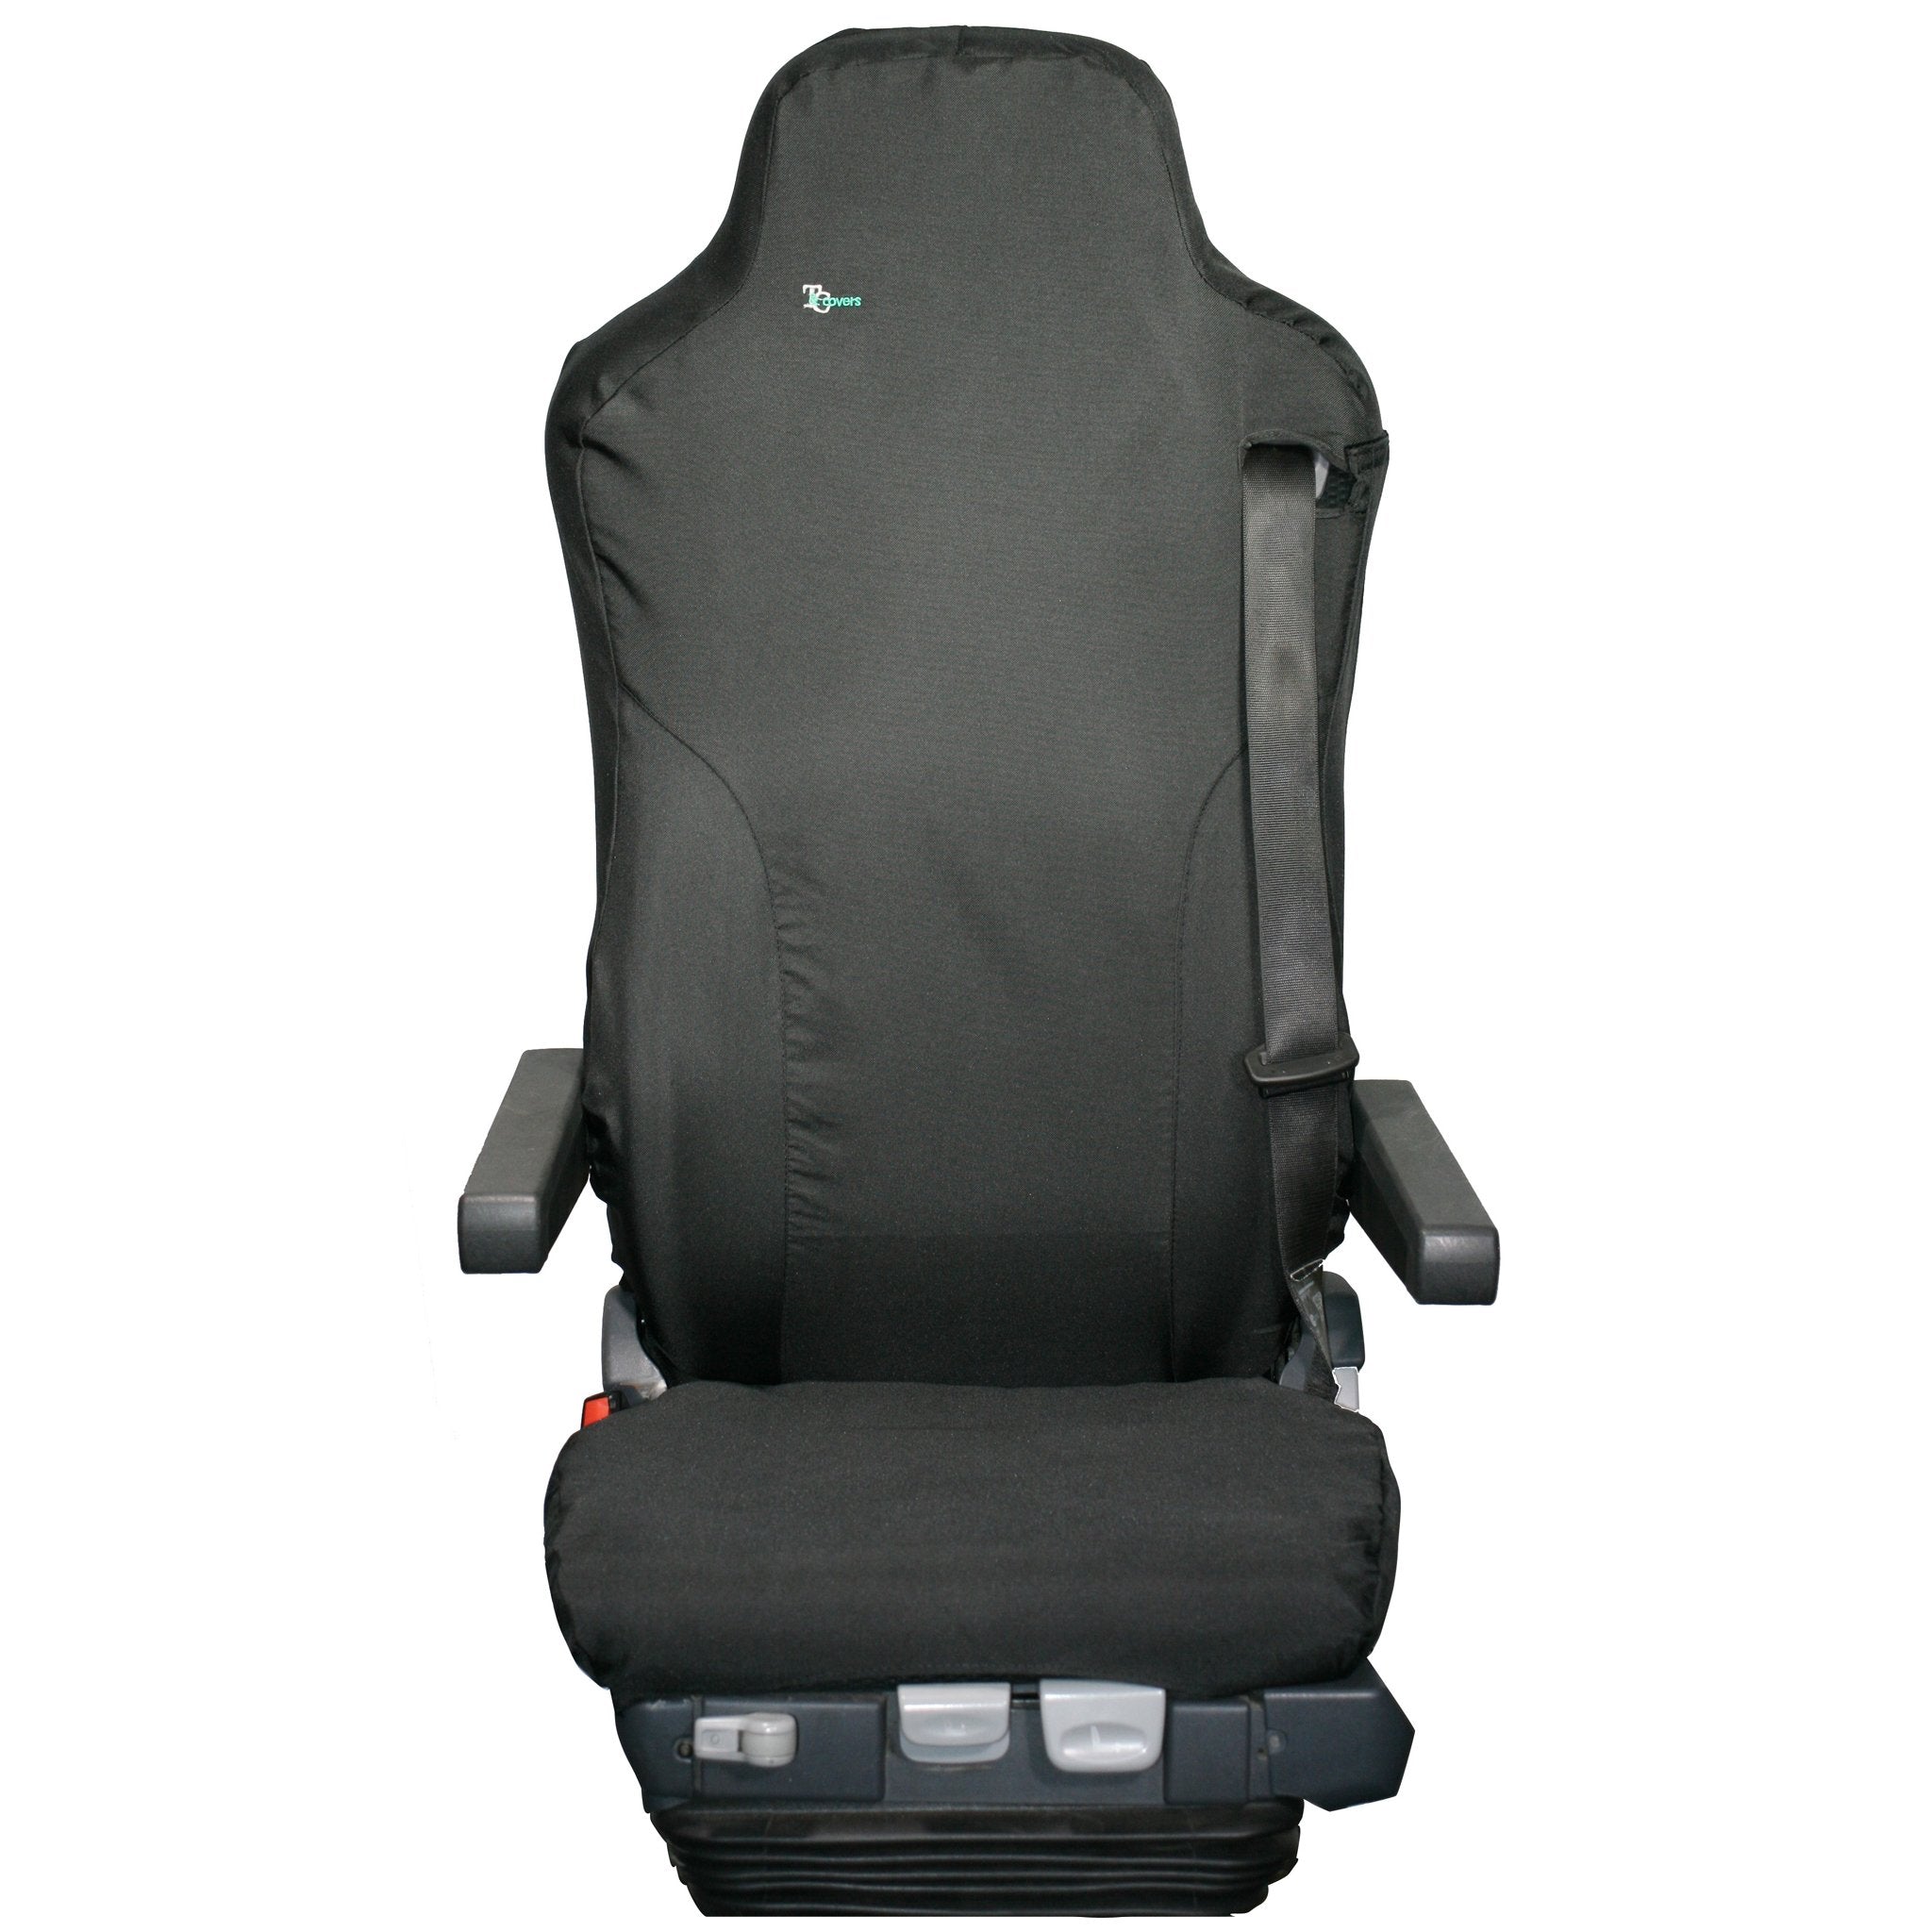 Mercedes Truck Seat Covers